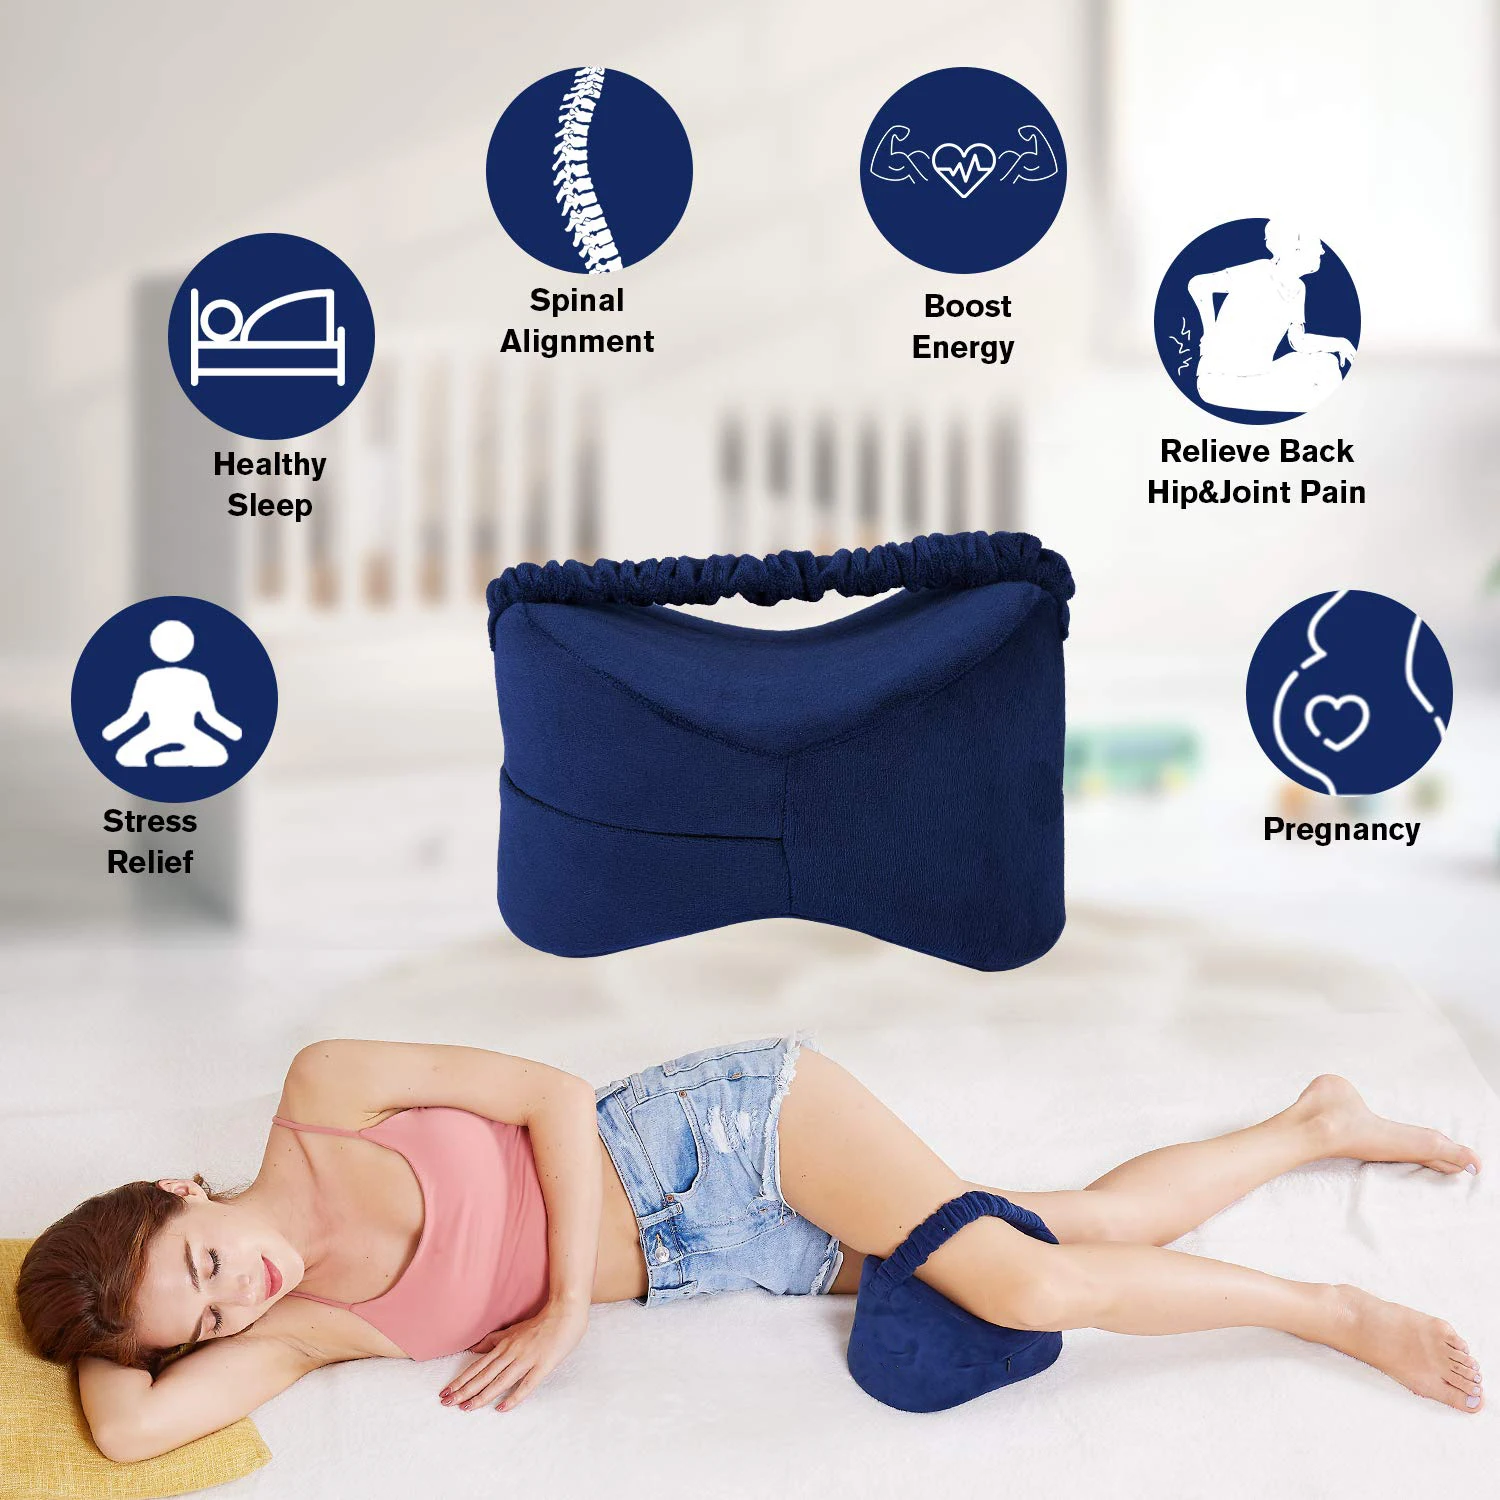 https://ae01.alicdn.com/kf/Hd1a16196096d472fb82c8e12d37cf8bfb/Memory-Foam-Sleeping-Knee-Pillow-with-Strap-for-Side-Sleepers-Pregnancy-Pillows-Between-the-Legs-Relieve.jpg